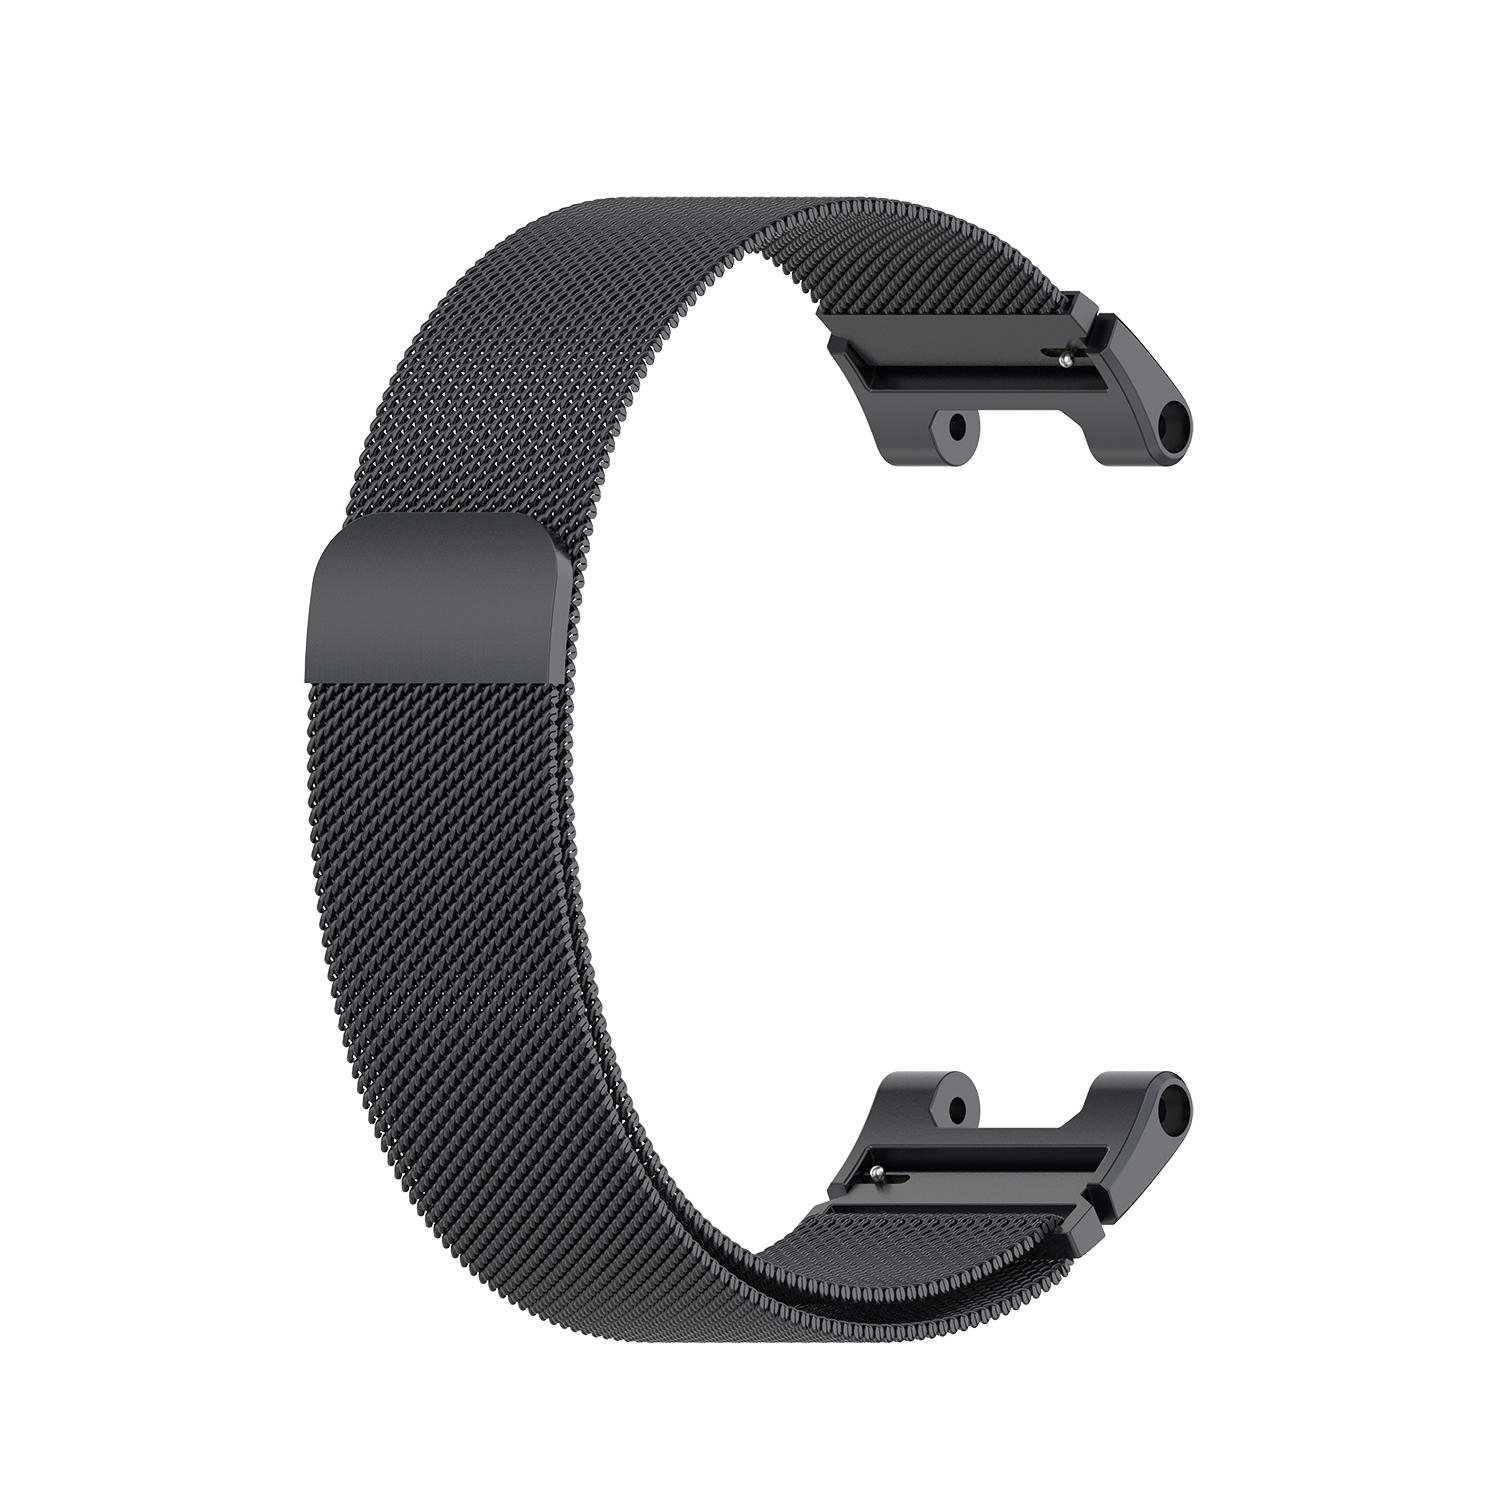 Bakeey-Milanese-Stainless-Steel-Strap-Watch-Band-Watch-Strap-Replacement-for-Amazfit-Ares-1748296-16